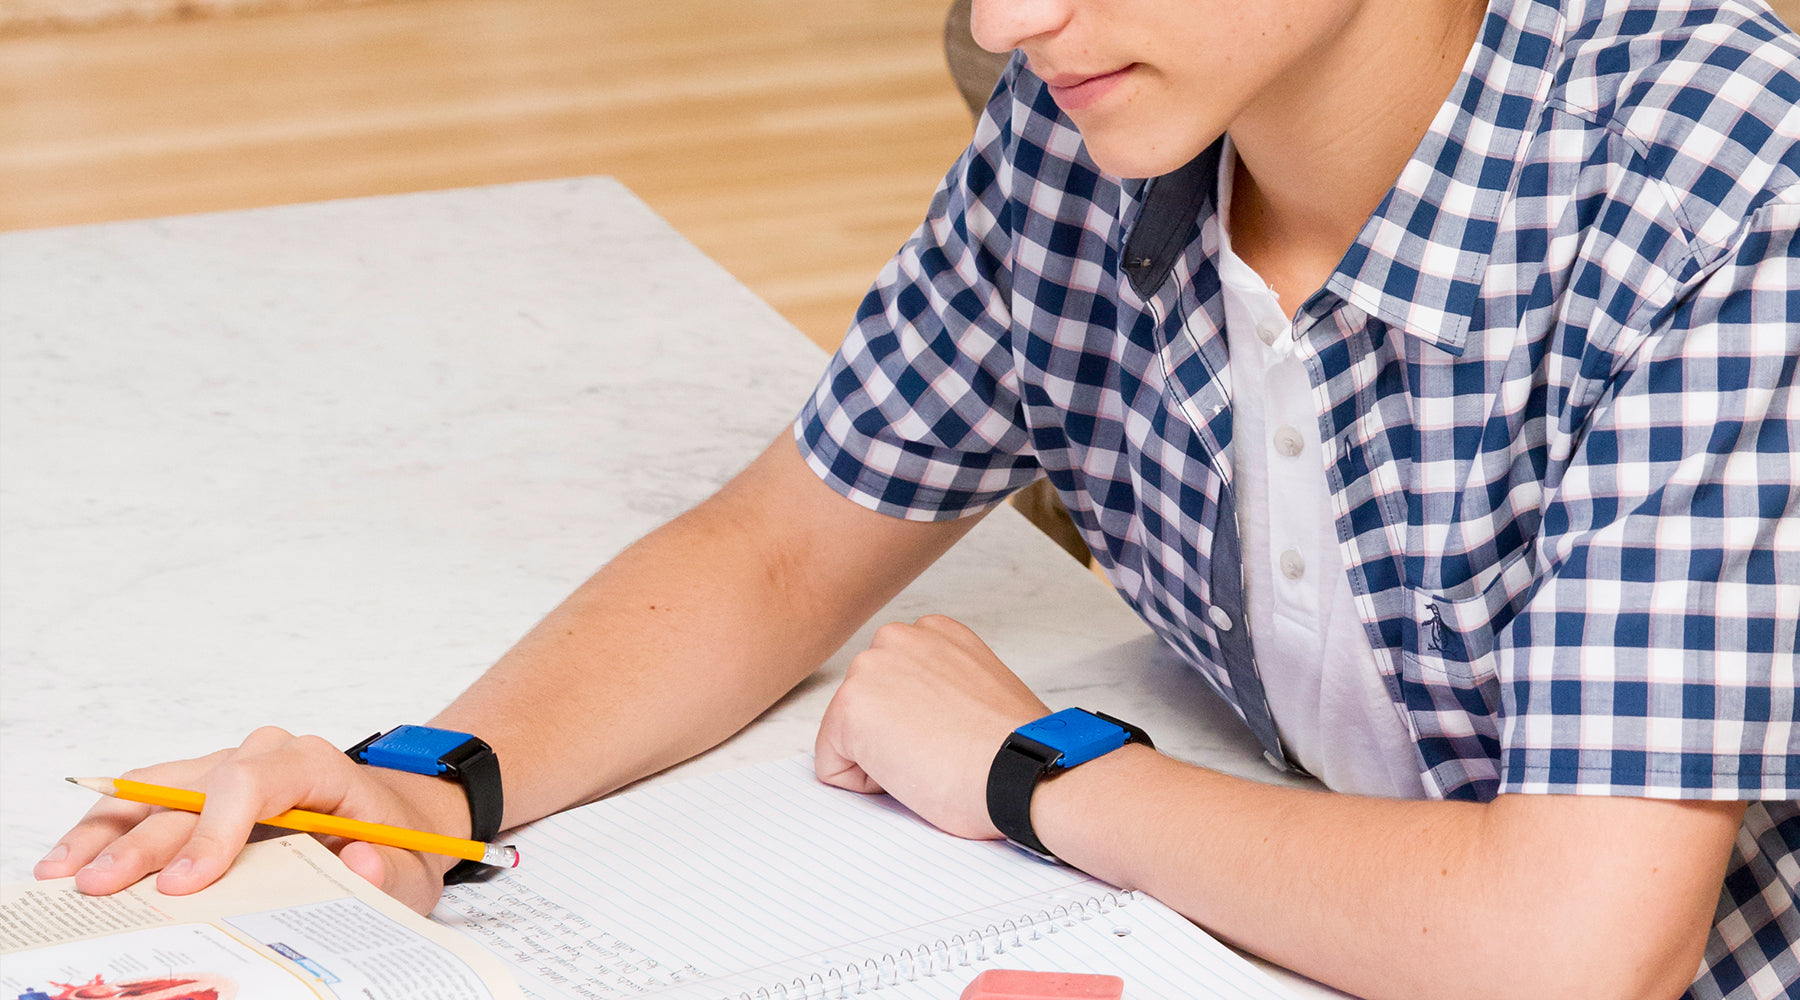 Preliminary ADHD Quotient Study Results Show Reduction of Hyperactivity with TouchPoints™